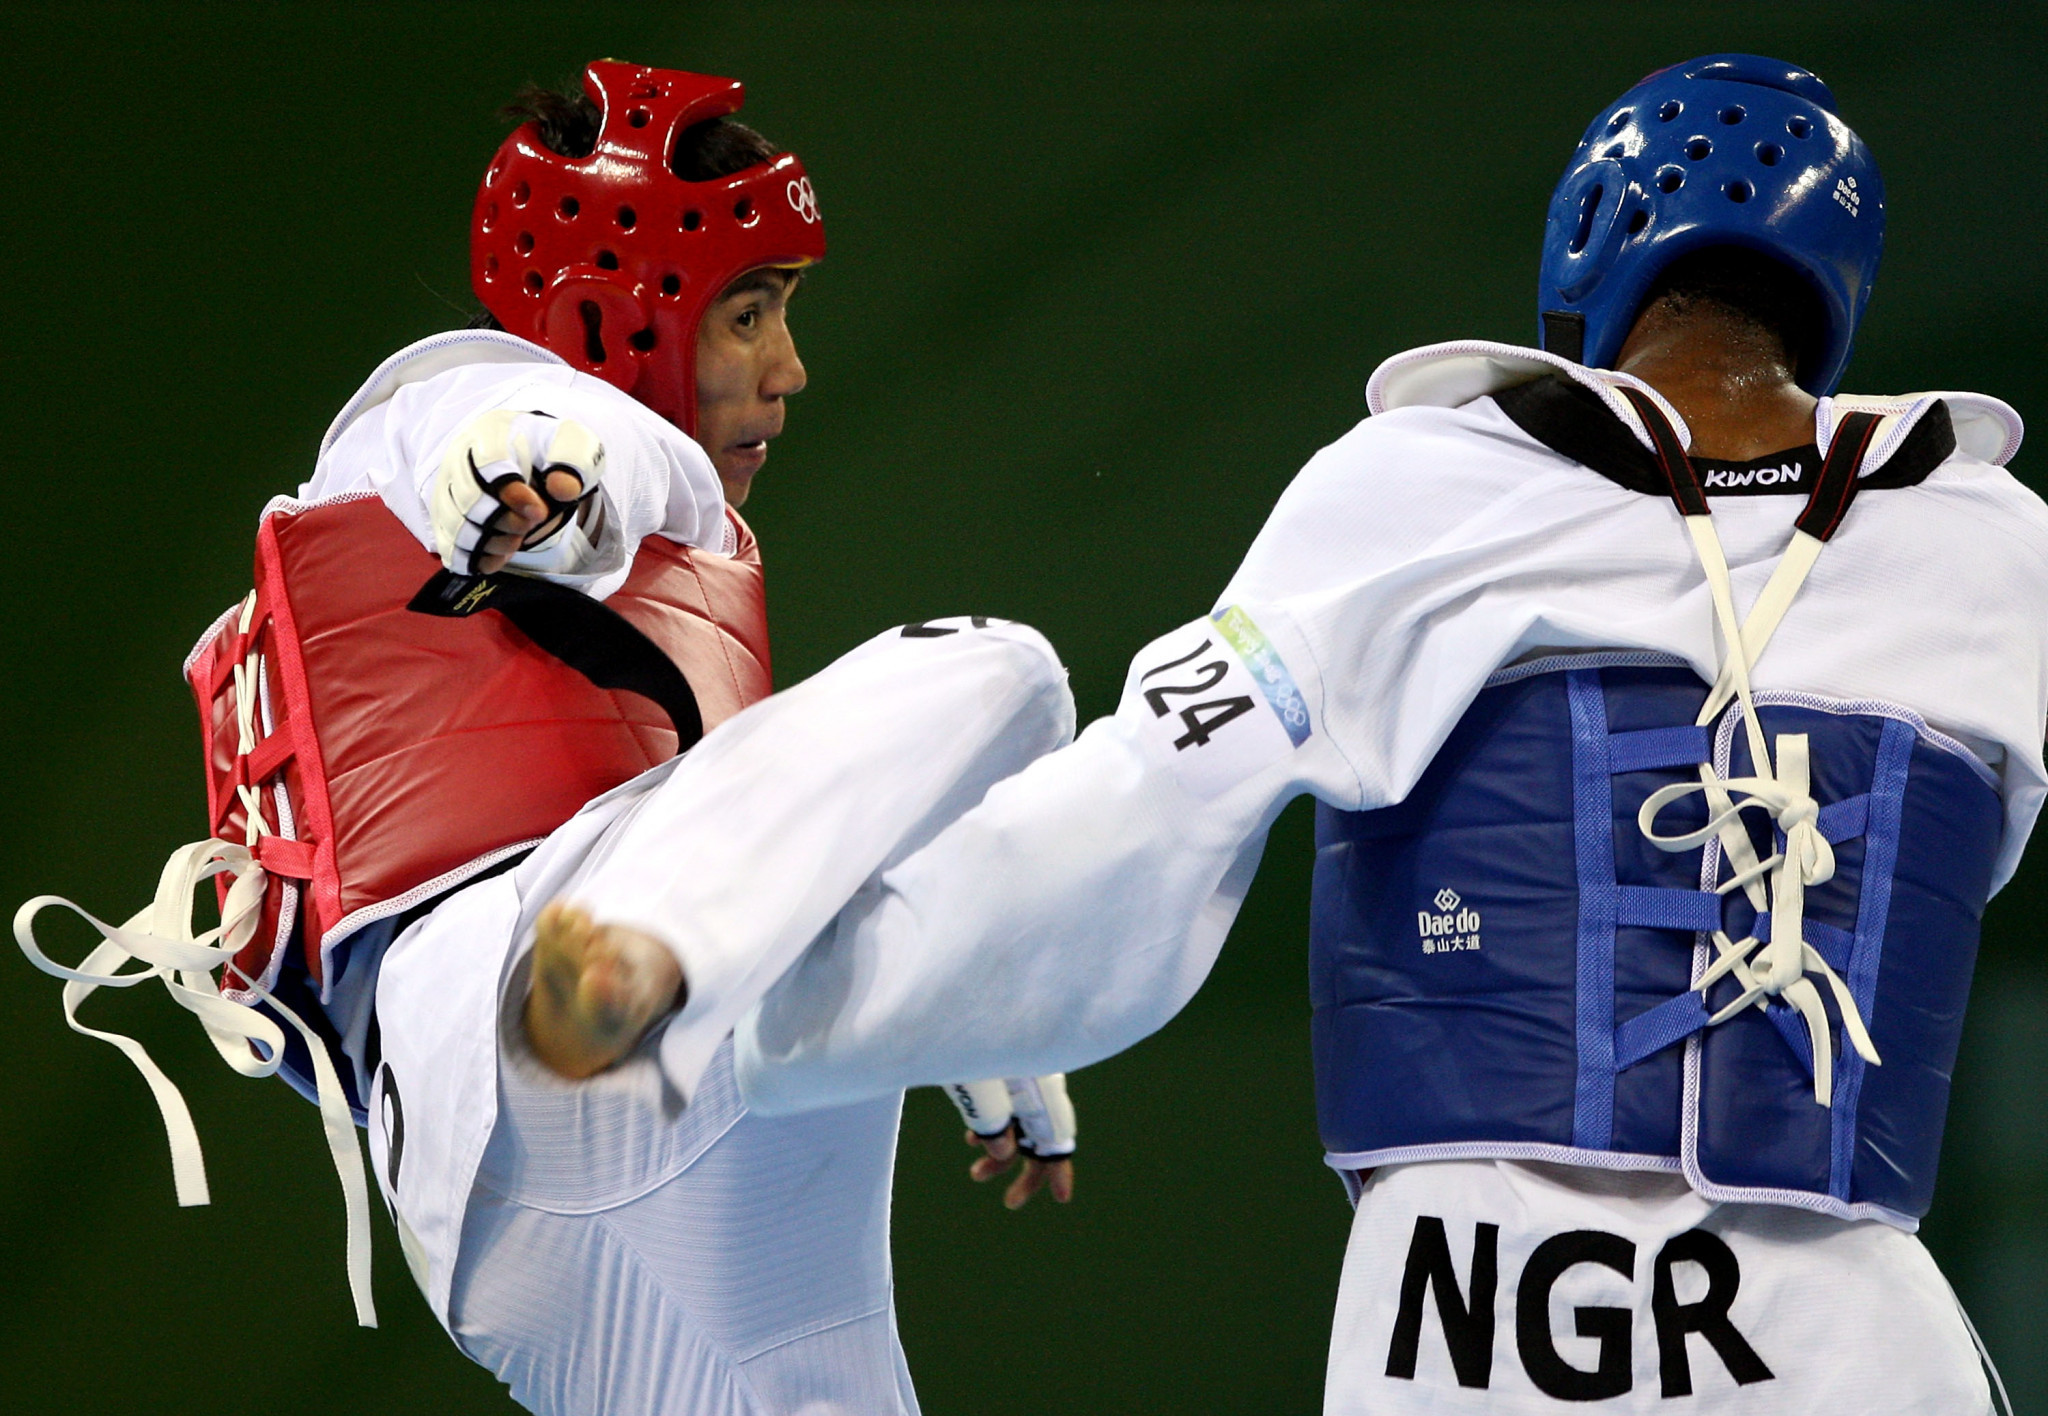 Two taekwondo competitions are set to be held in Kebbi State in 2023, with the hope of developing the sport in the area and potentially unearthing Olympic champions of the future ©Getty Images 

